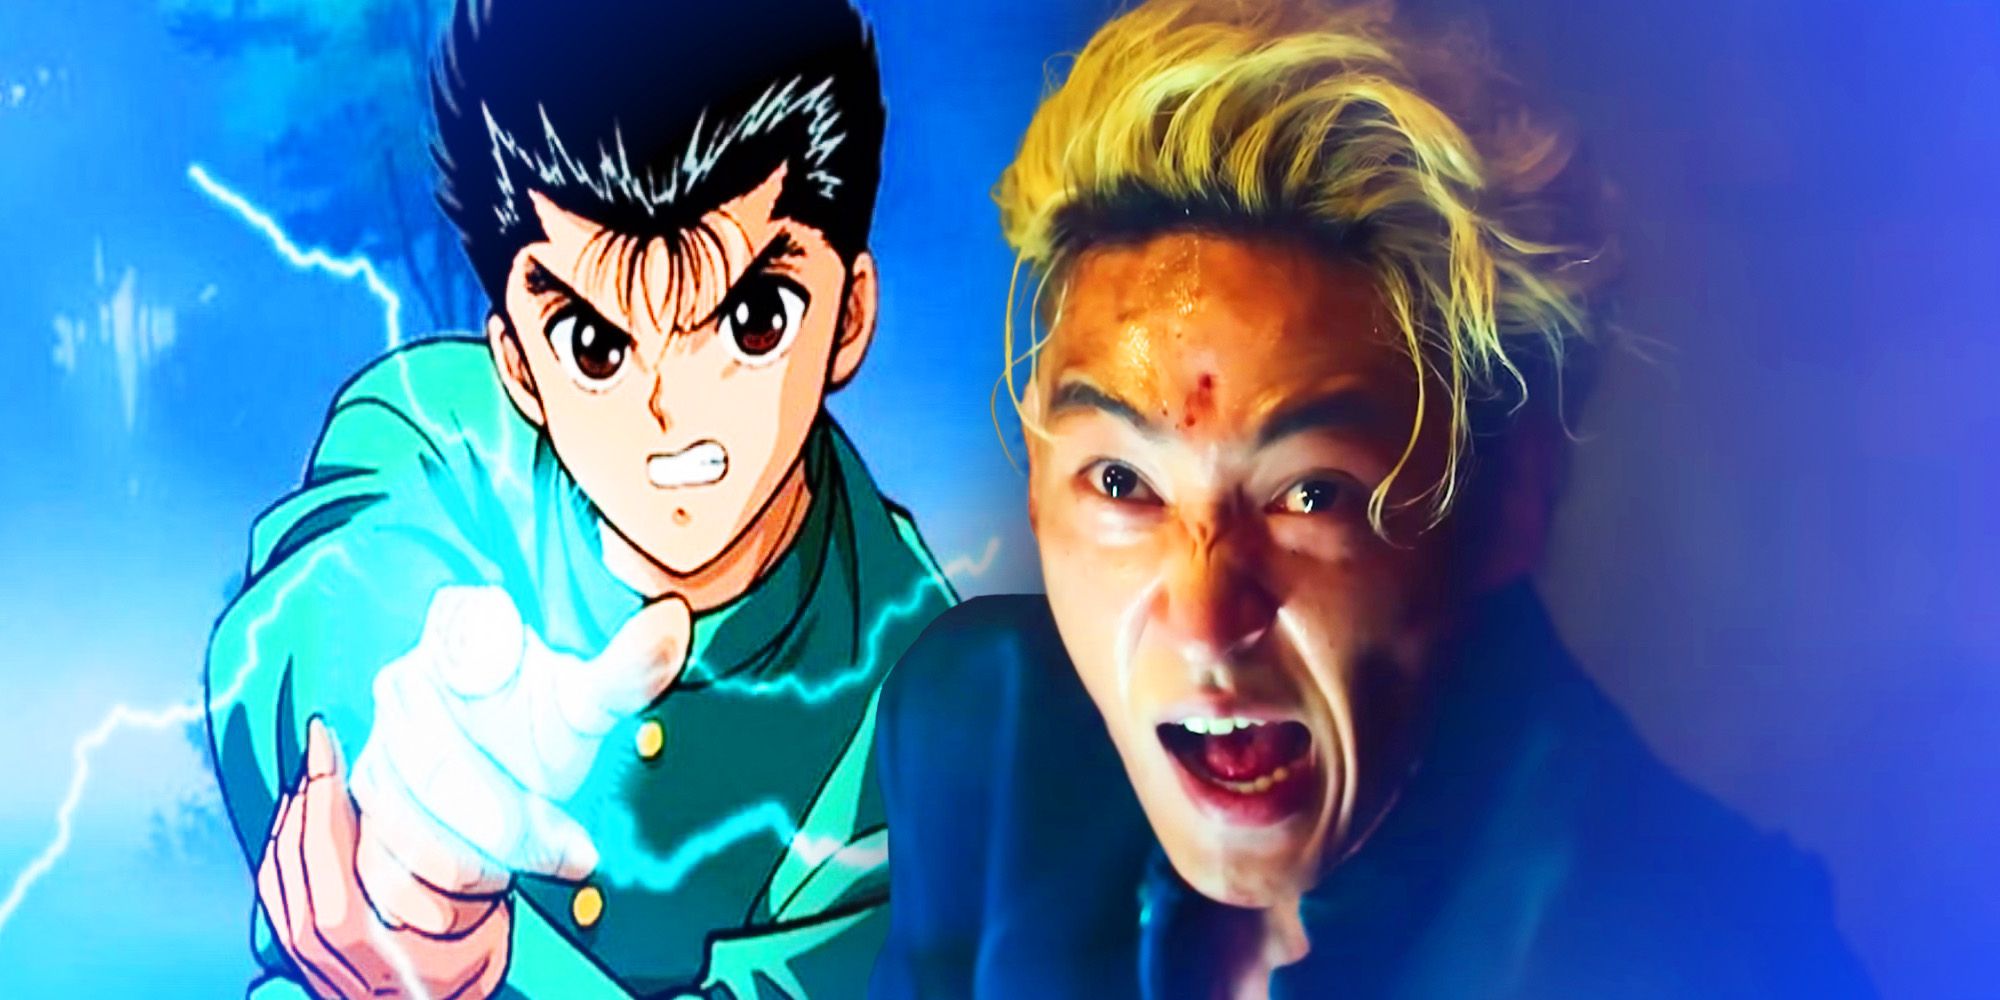 10 Yu Yu Hakusho Scenes We Can’t Wait To See In Netflix’s Live-Action Show